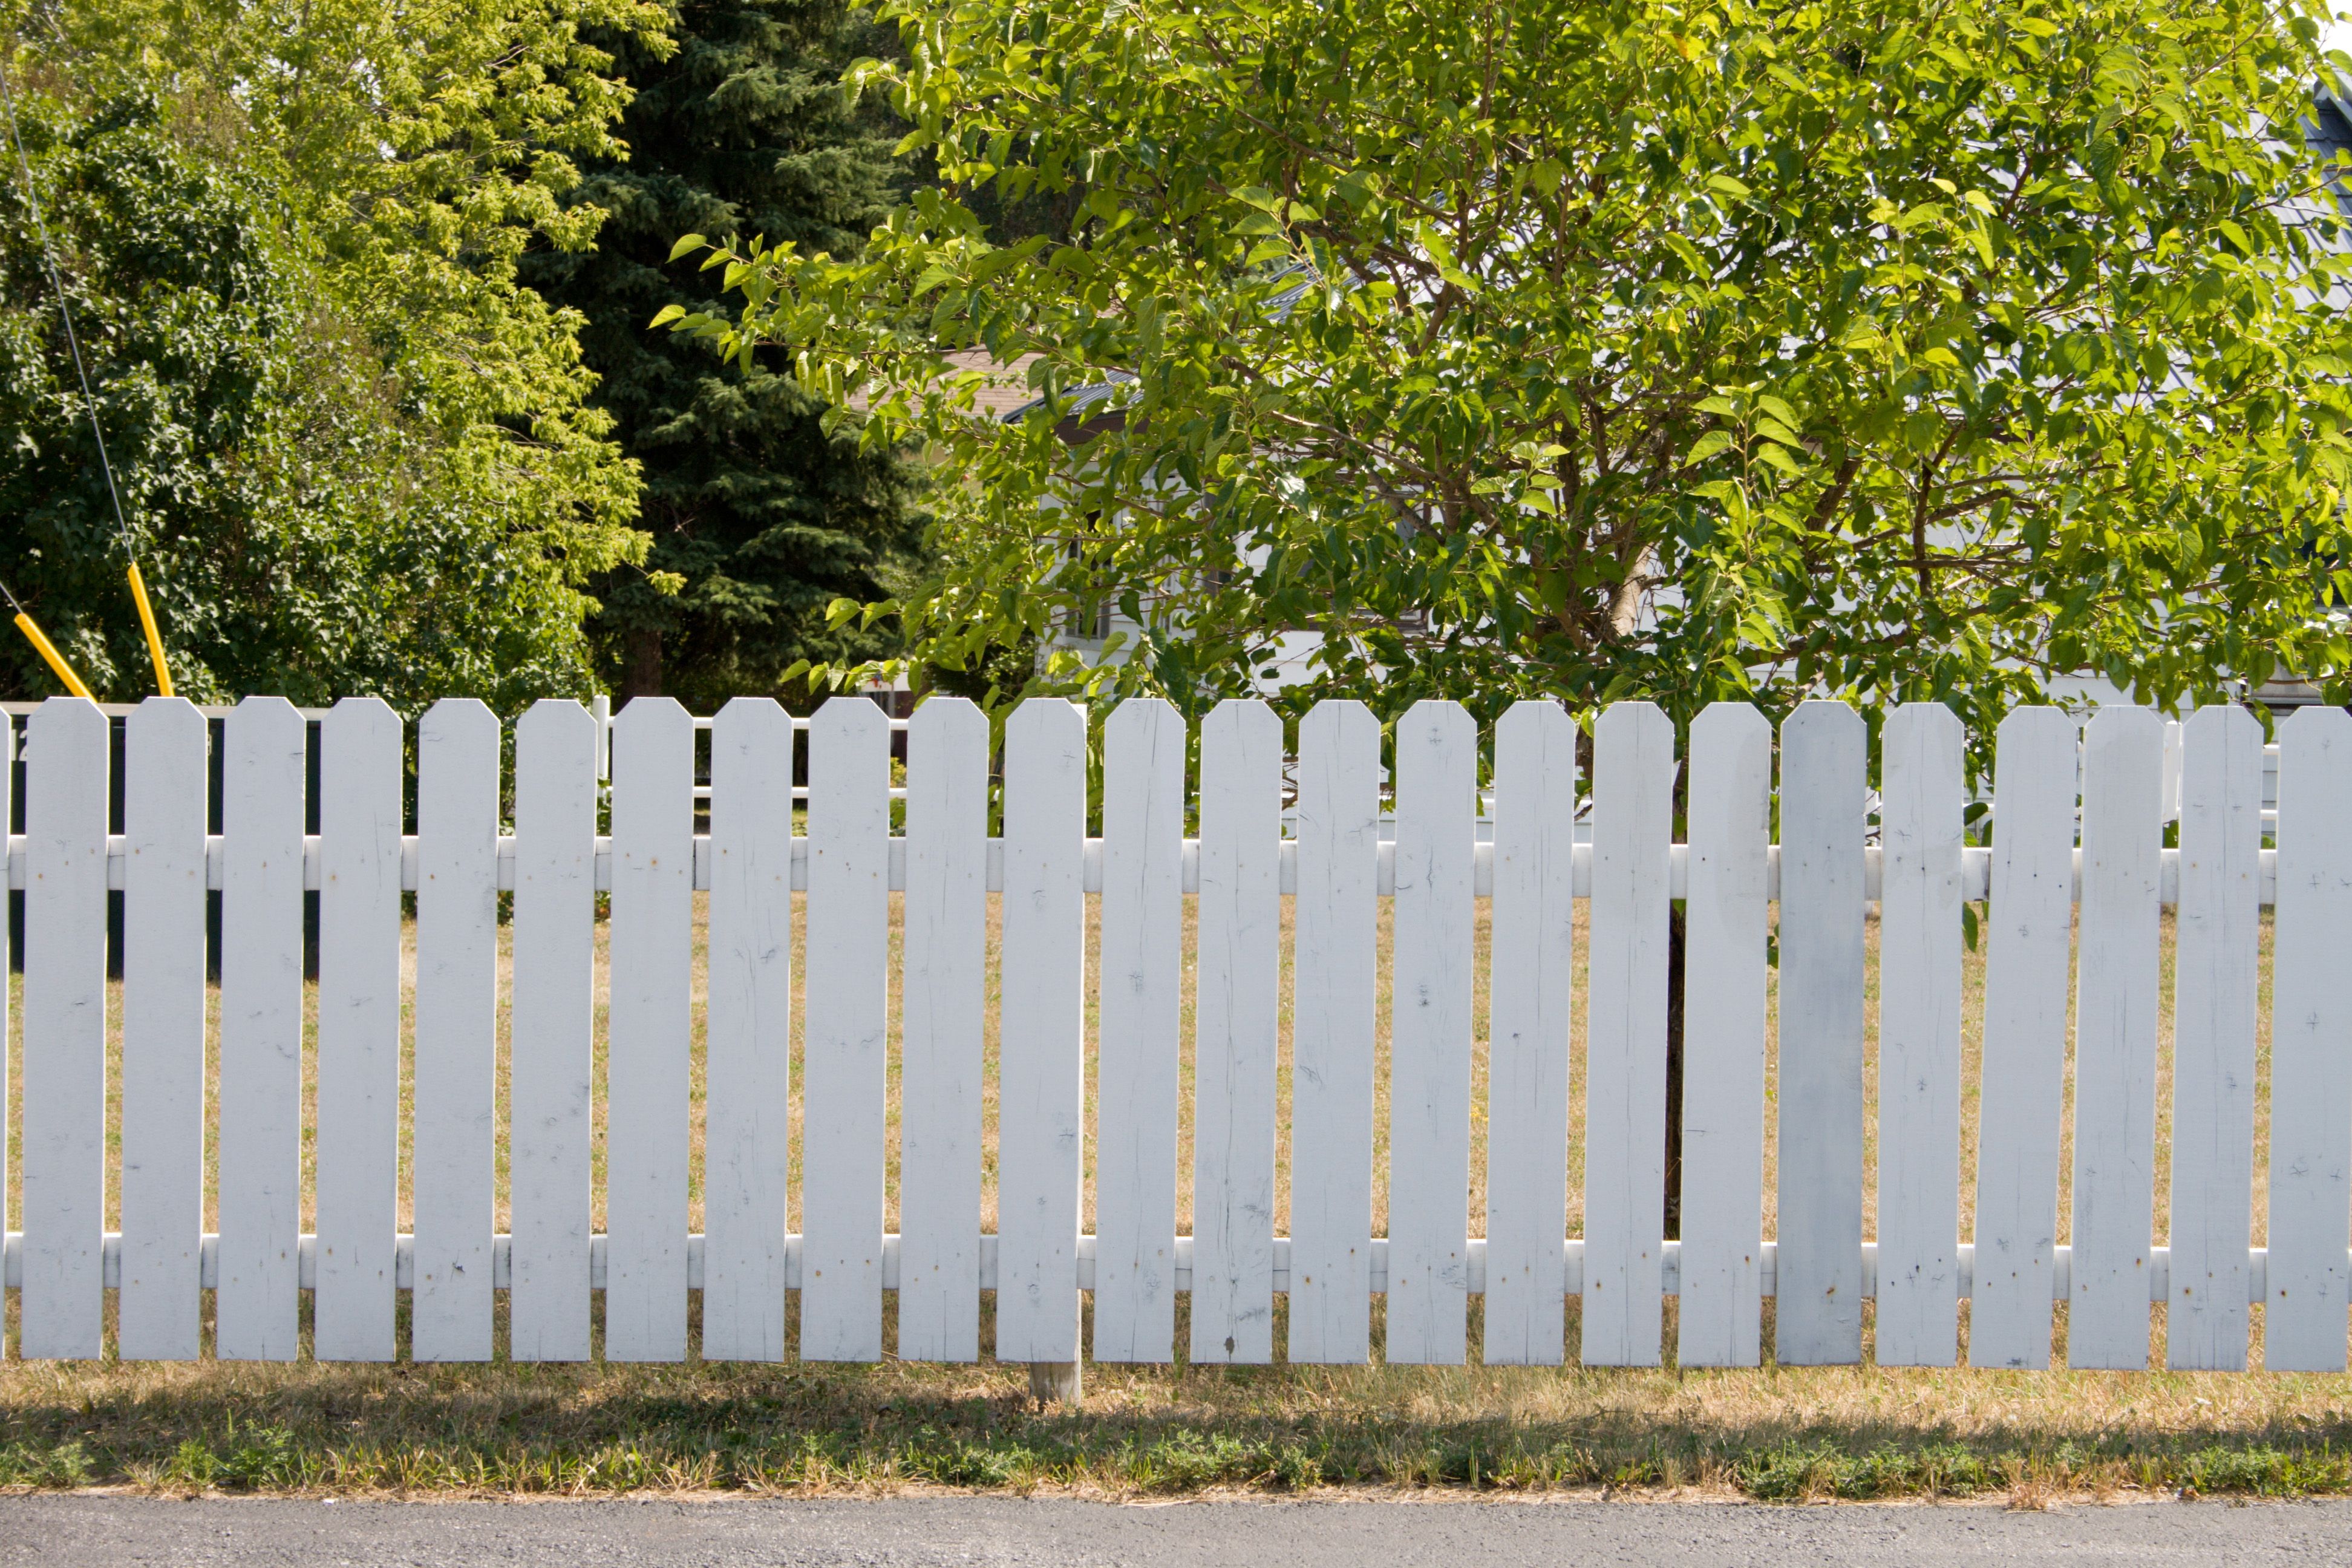 How To Make Your Own Picket Fence